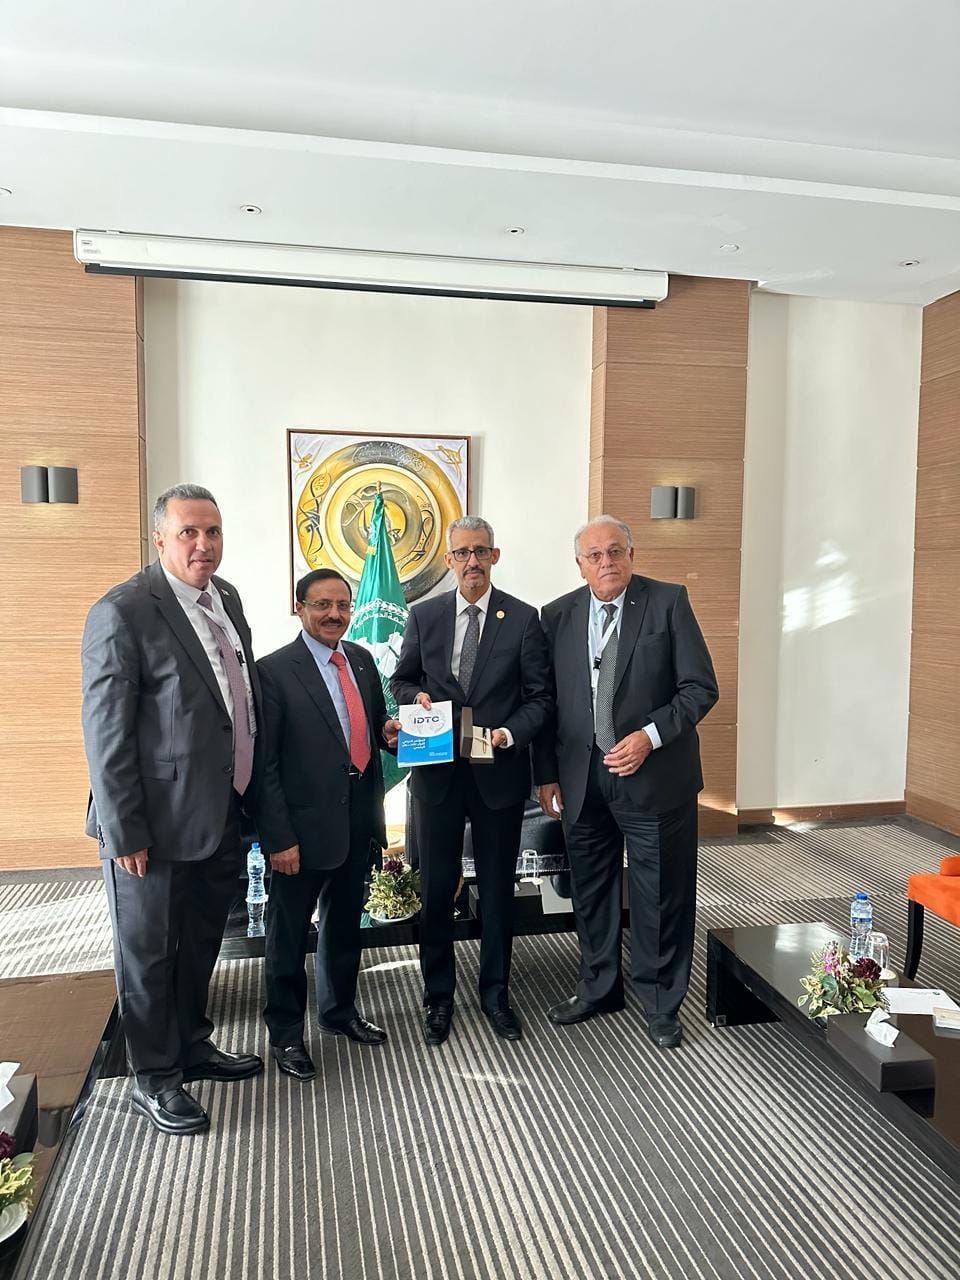 The Arab American University, ALECSO and the Palestinian National Commission for Education and Culture Sign a Partnership Agreement for Digital Transformation within Arab Universities